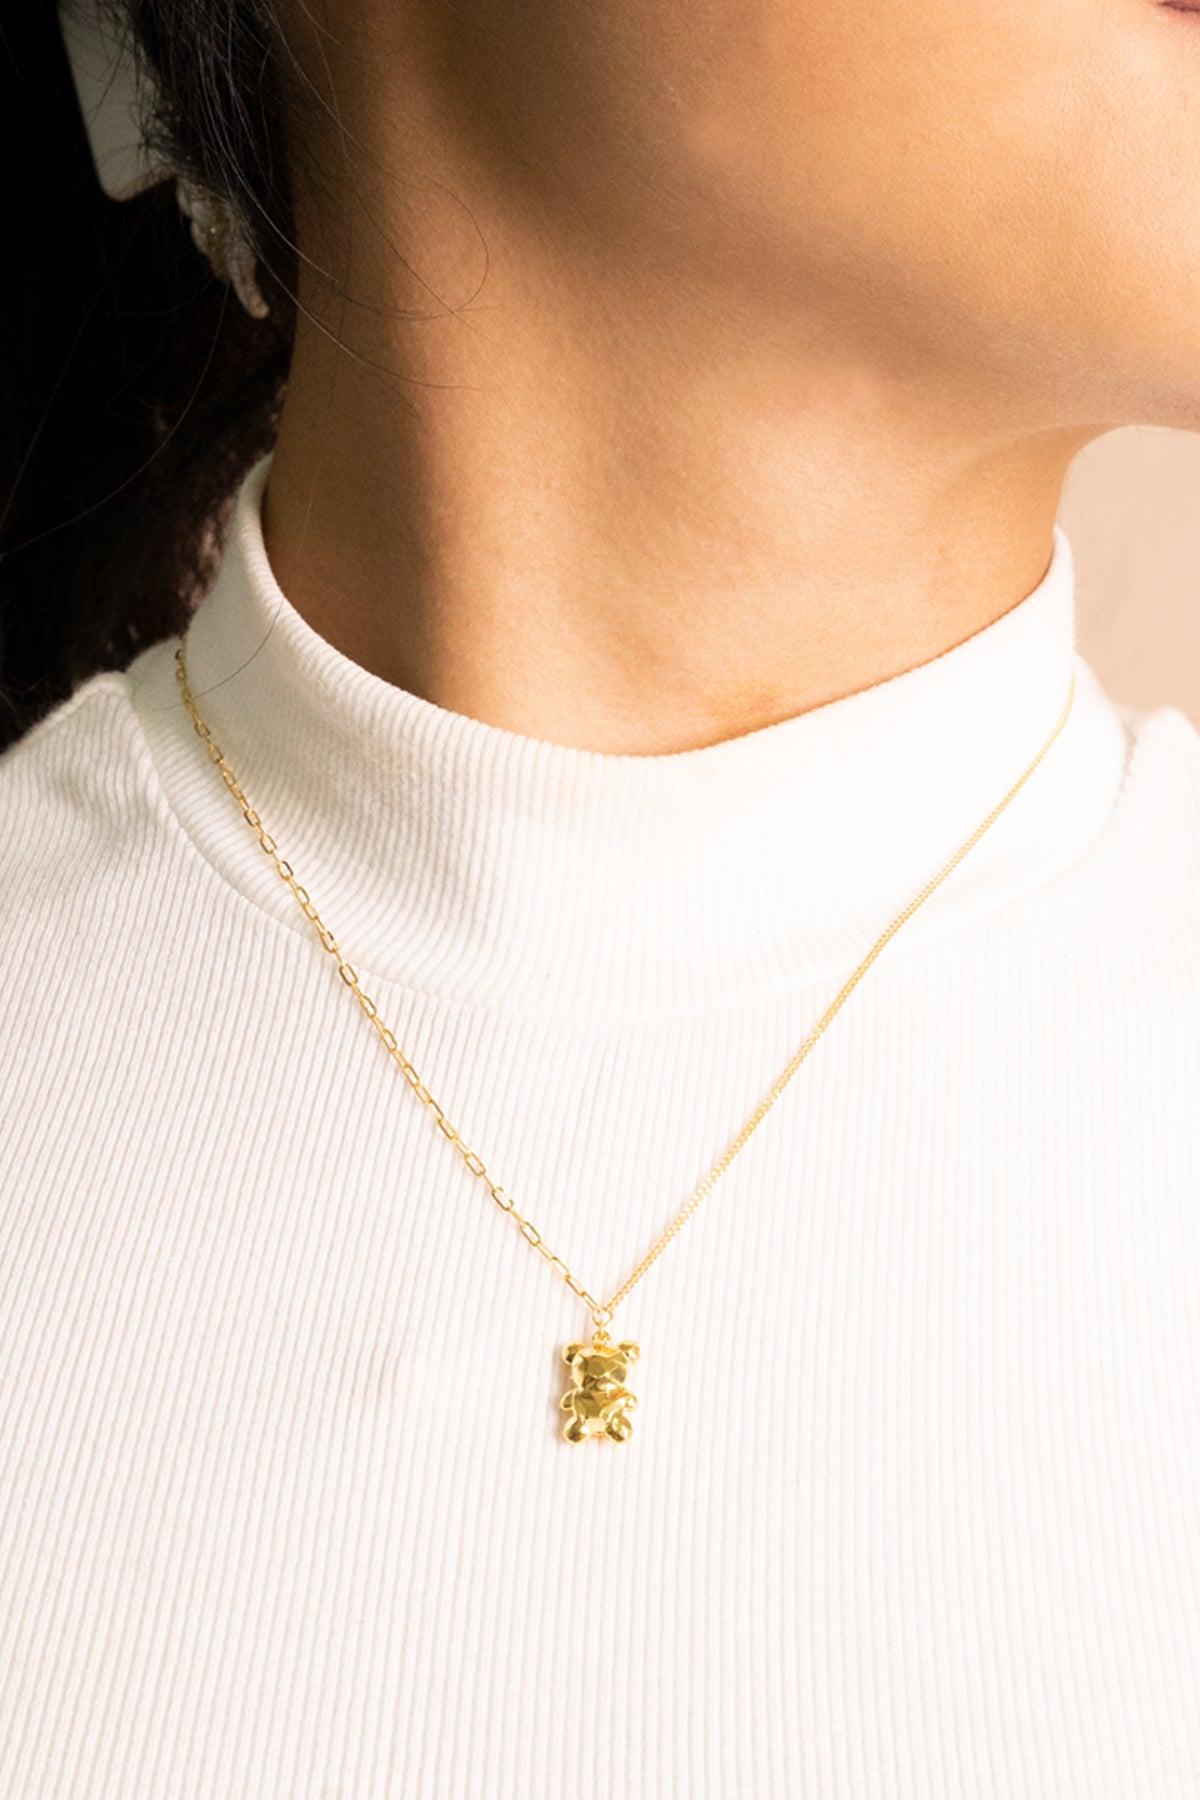 916 Gold Bear Necklace